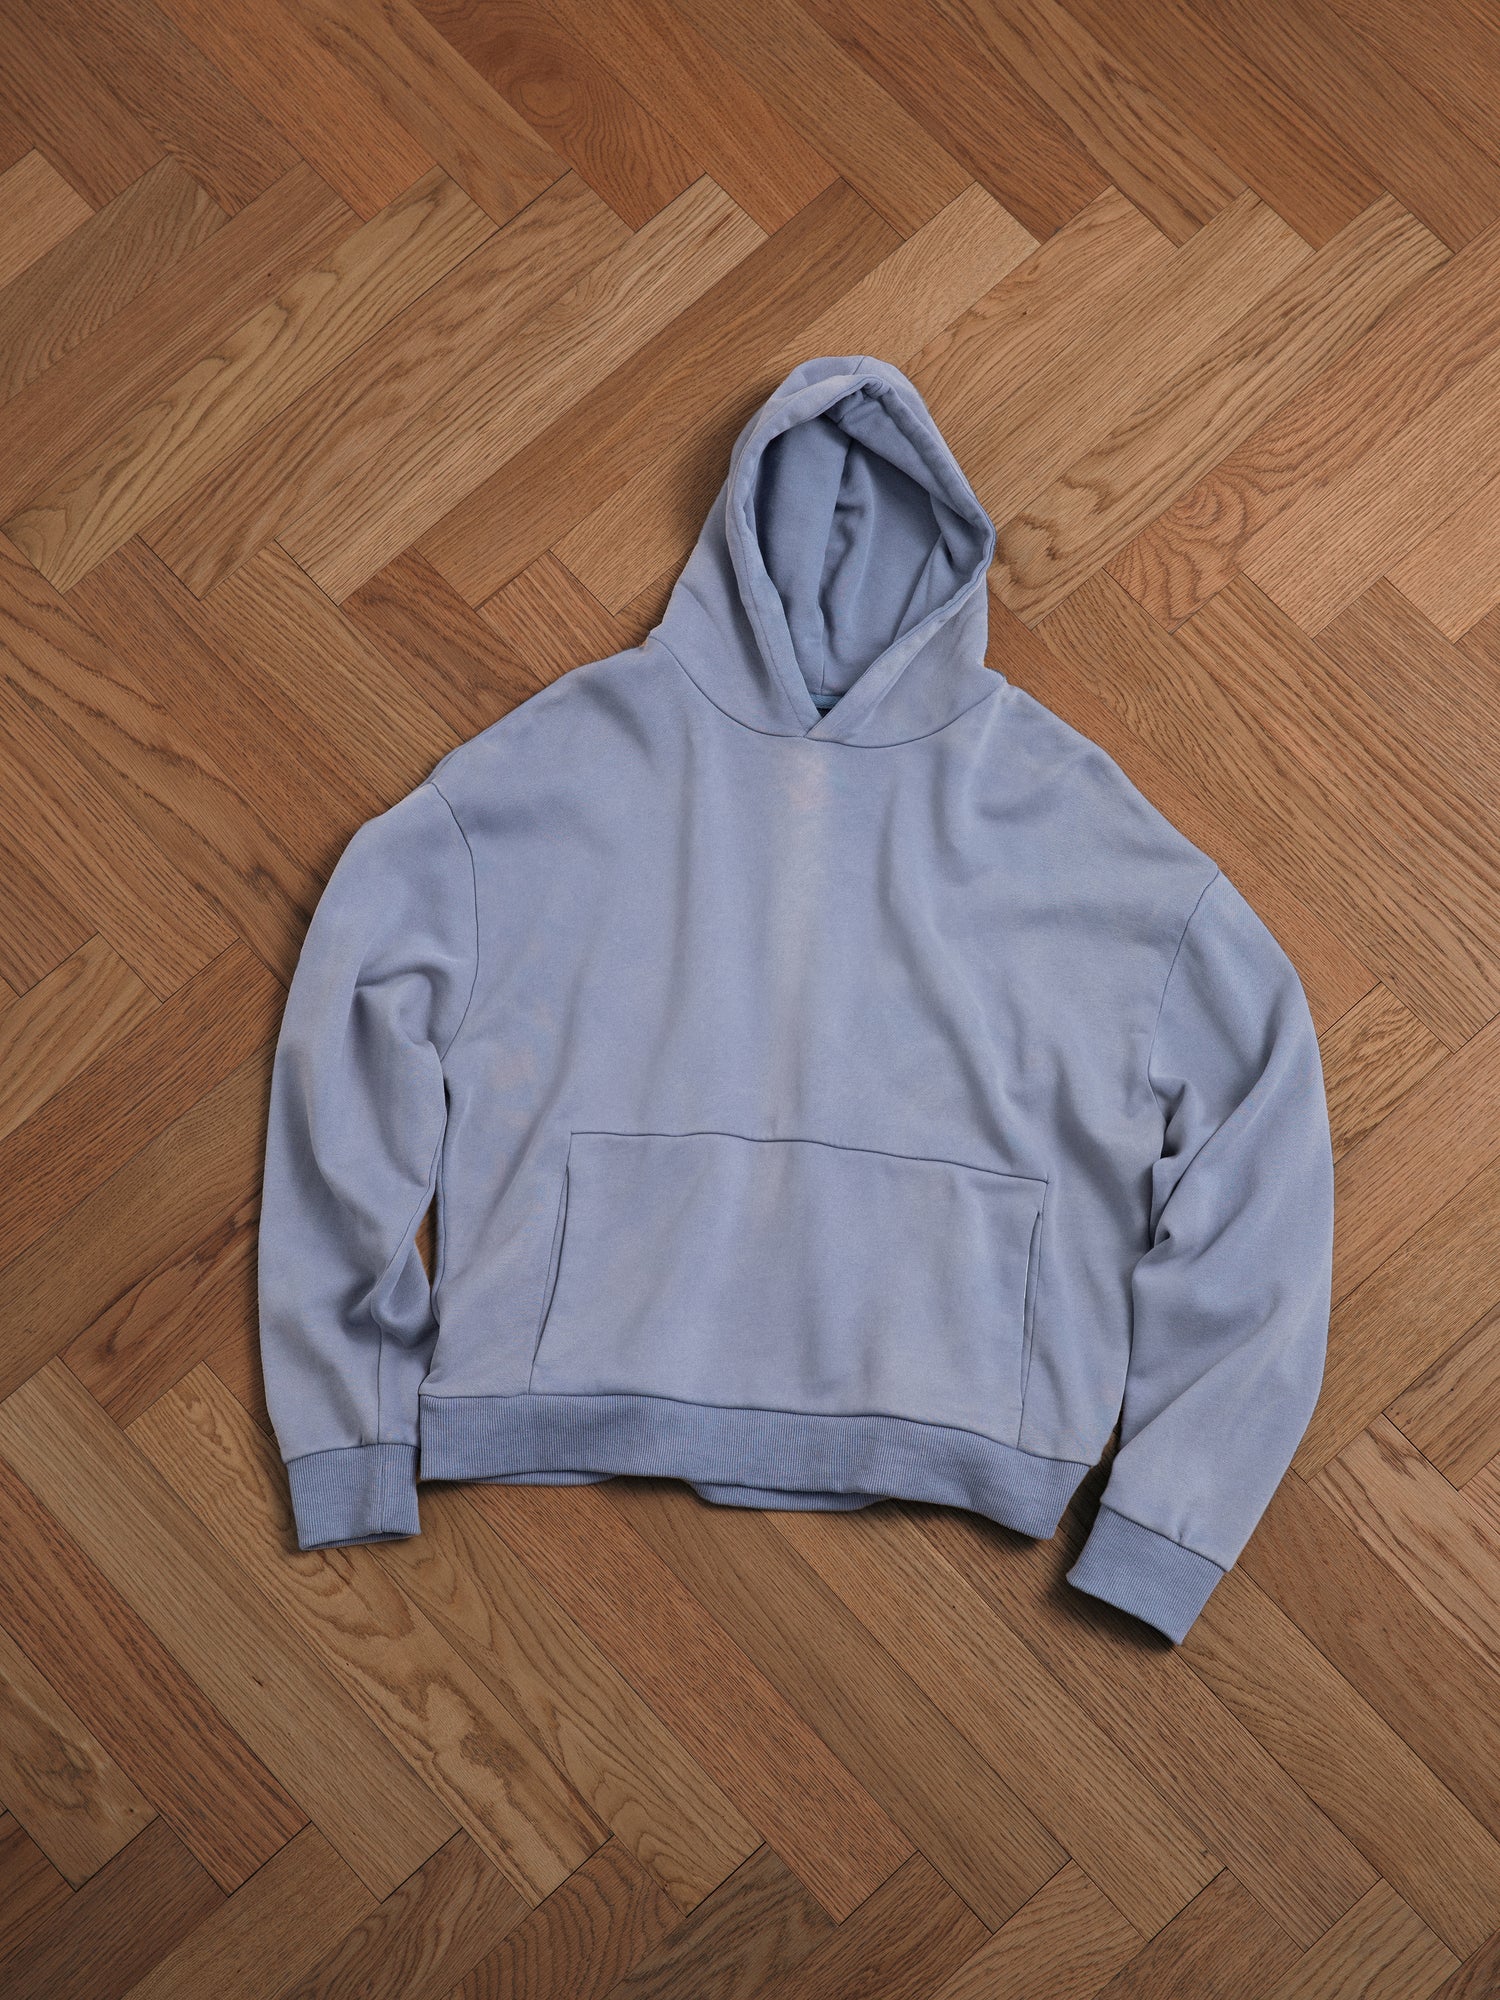 A Faded Infinity Hoodie by Found on a wooden floor.